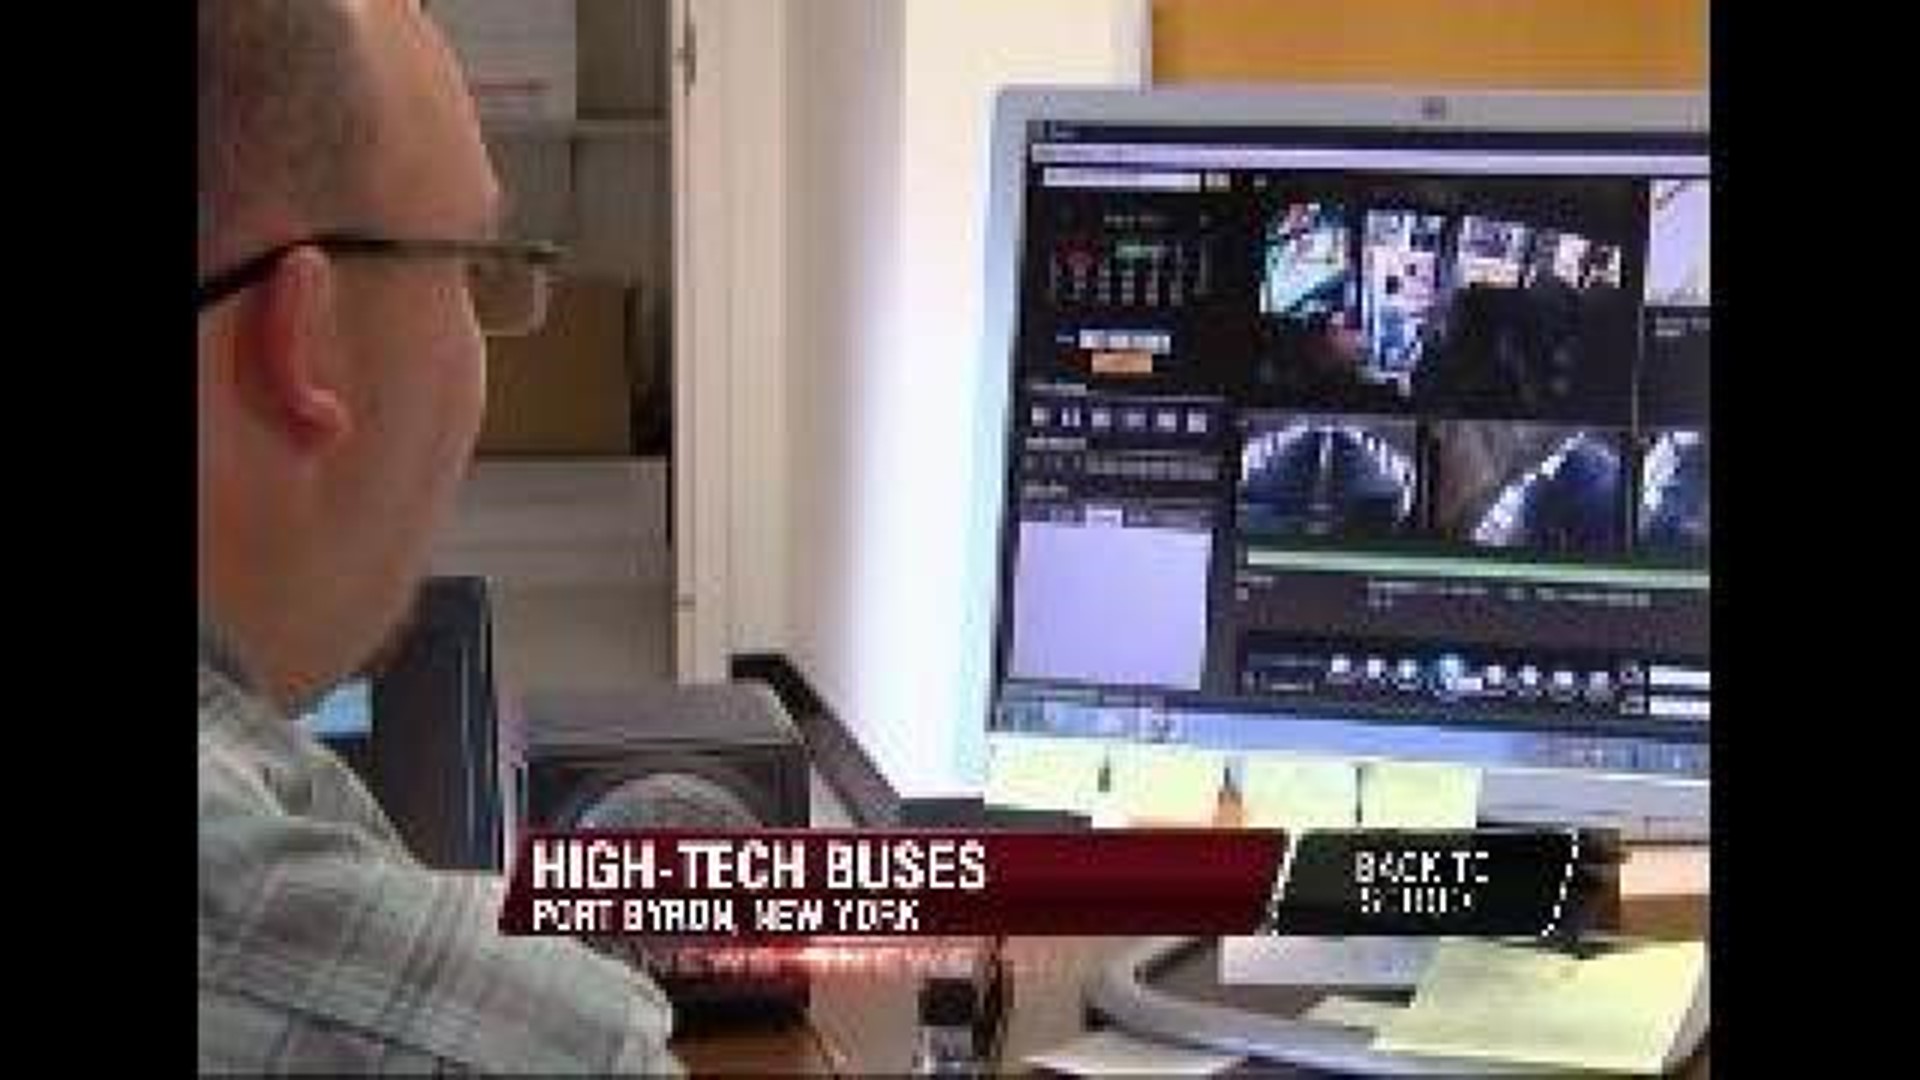 A school district keeps an extra eye on students with high-tech bus